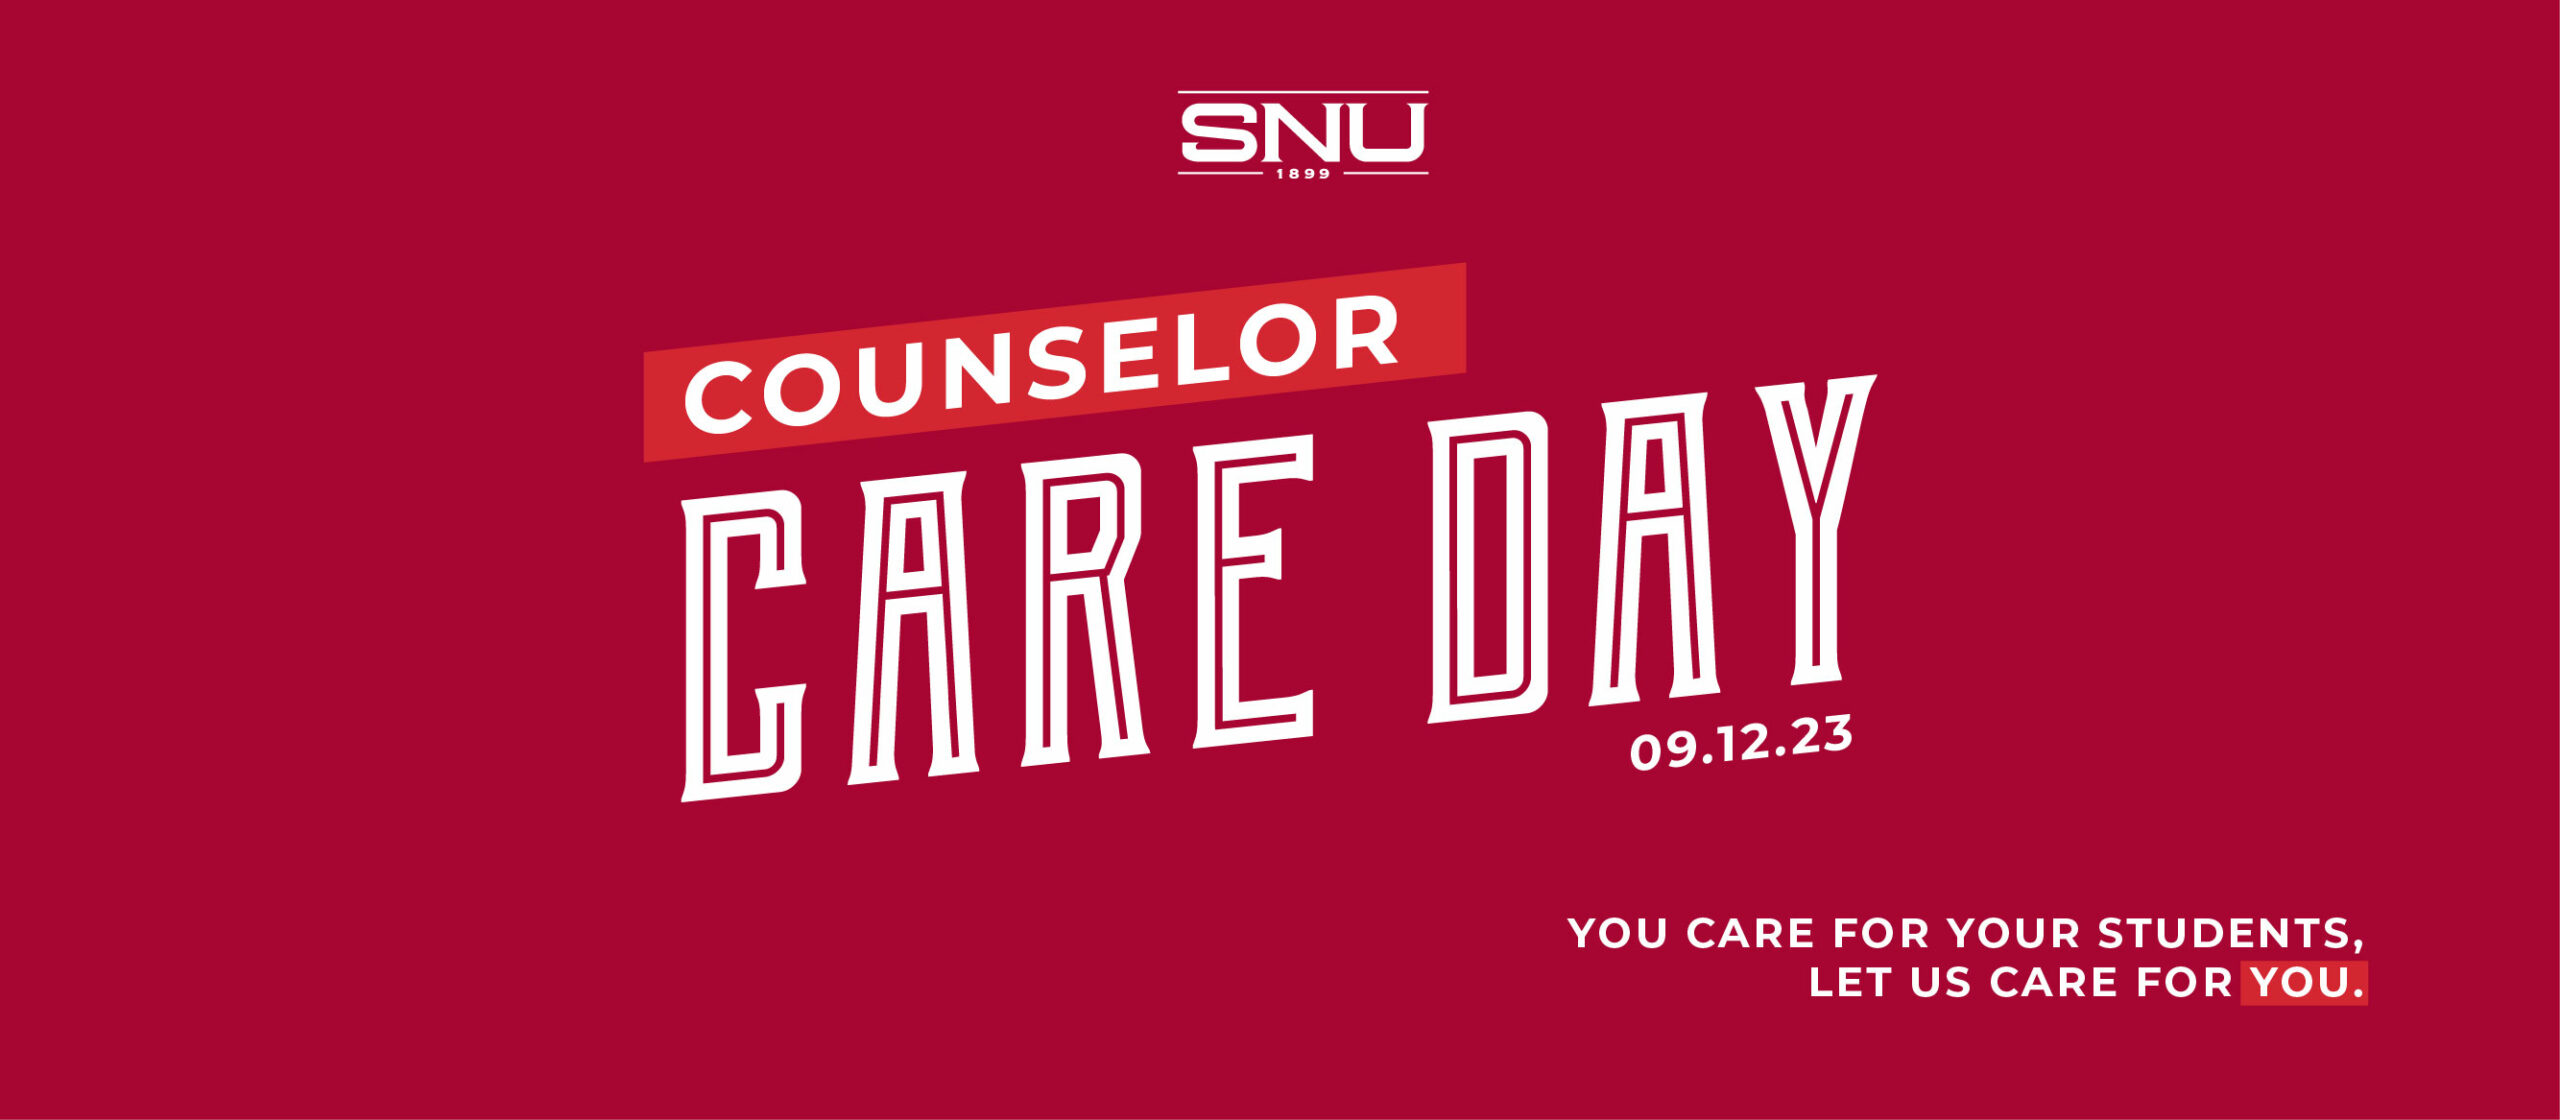 OK Counselor Care Day